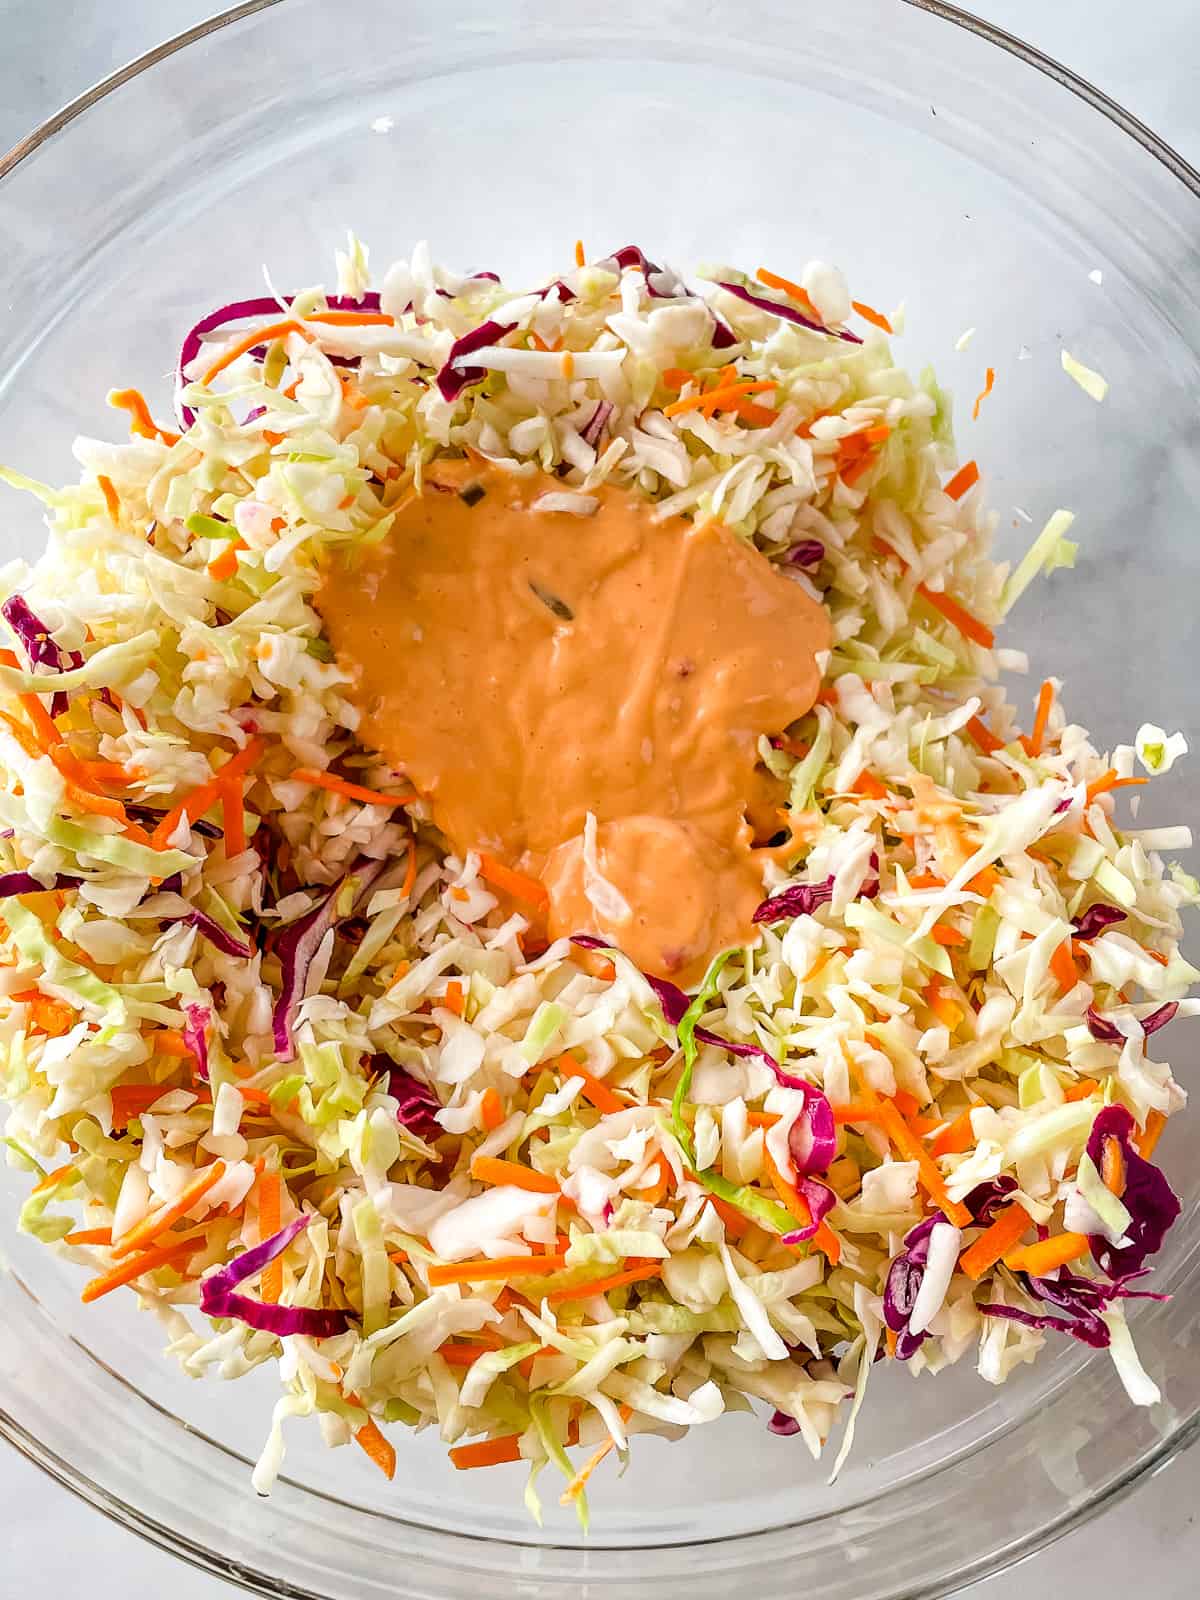 Coleslaw mix in bowl with Thousand Island dressing on it.